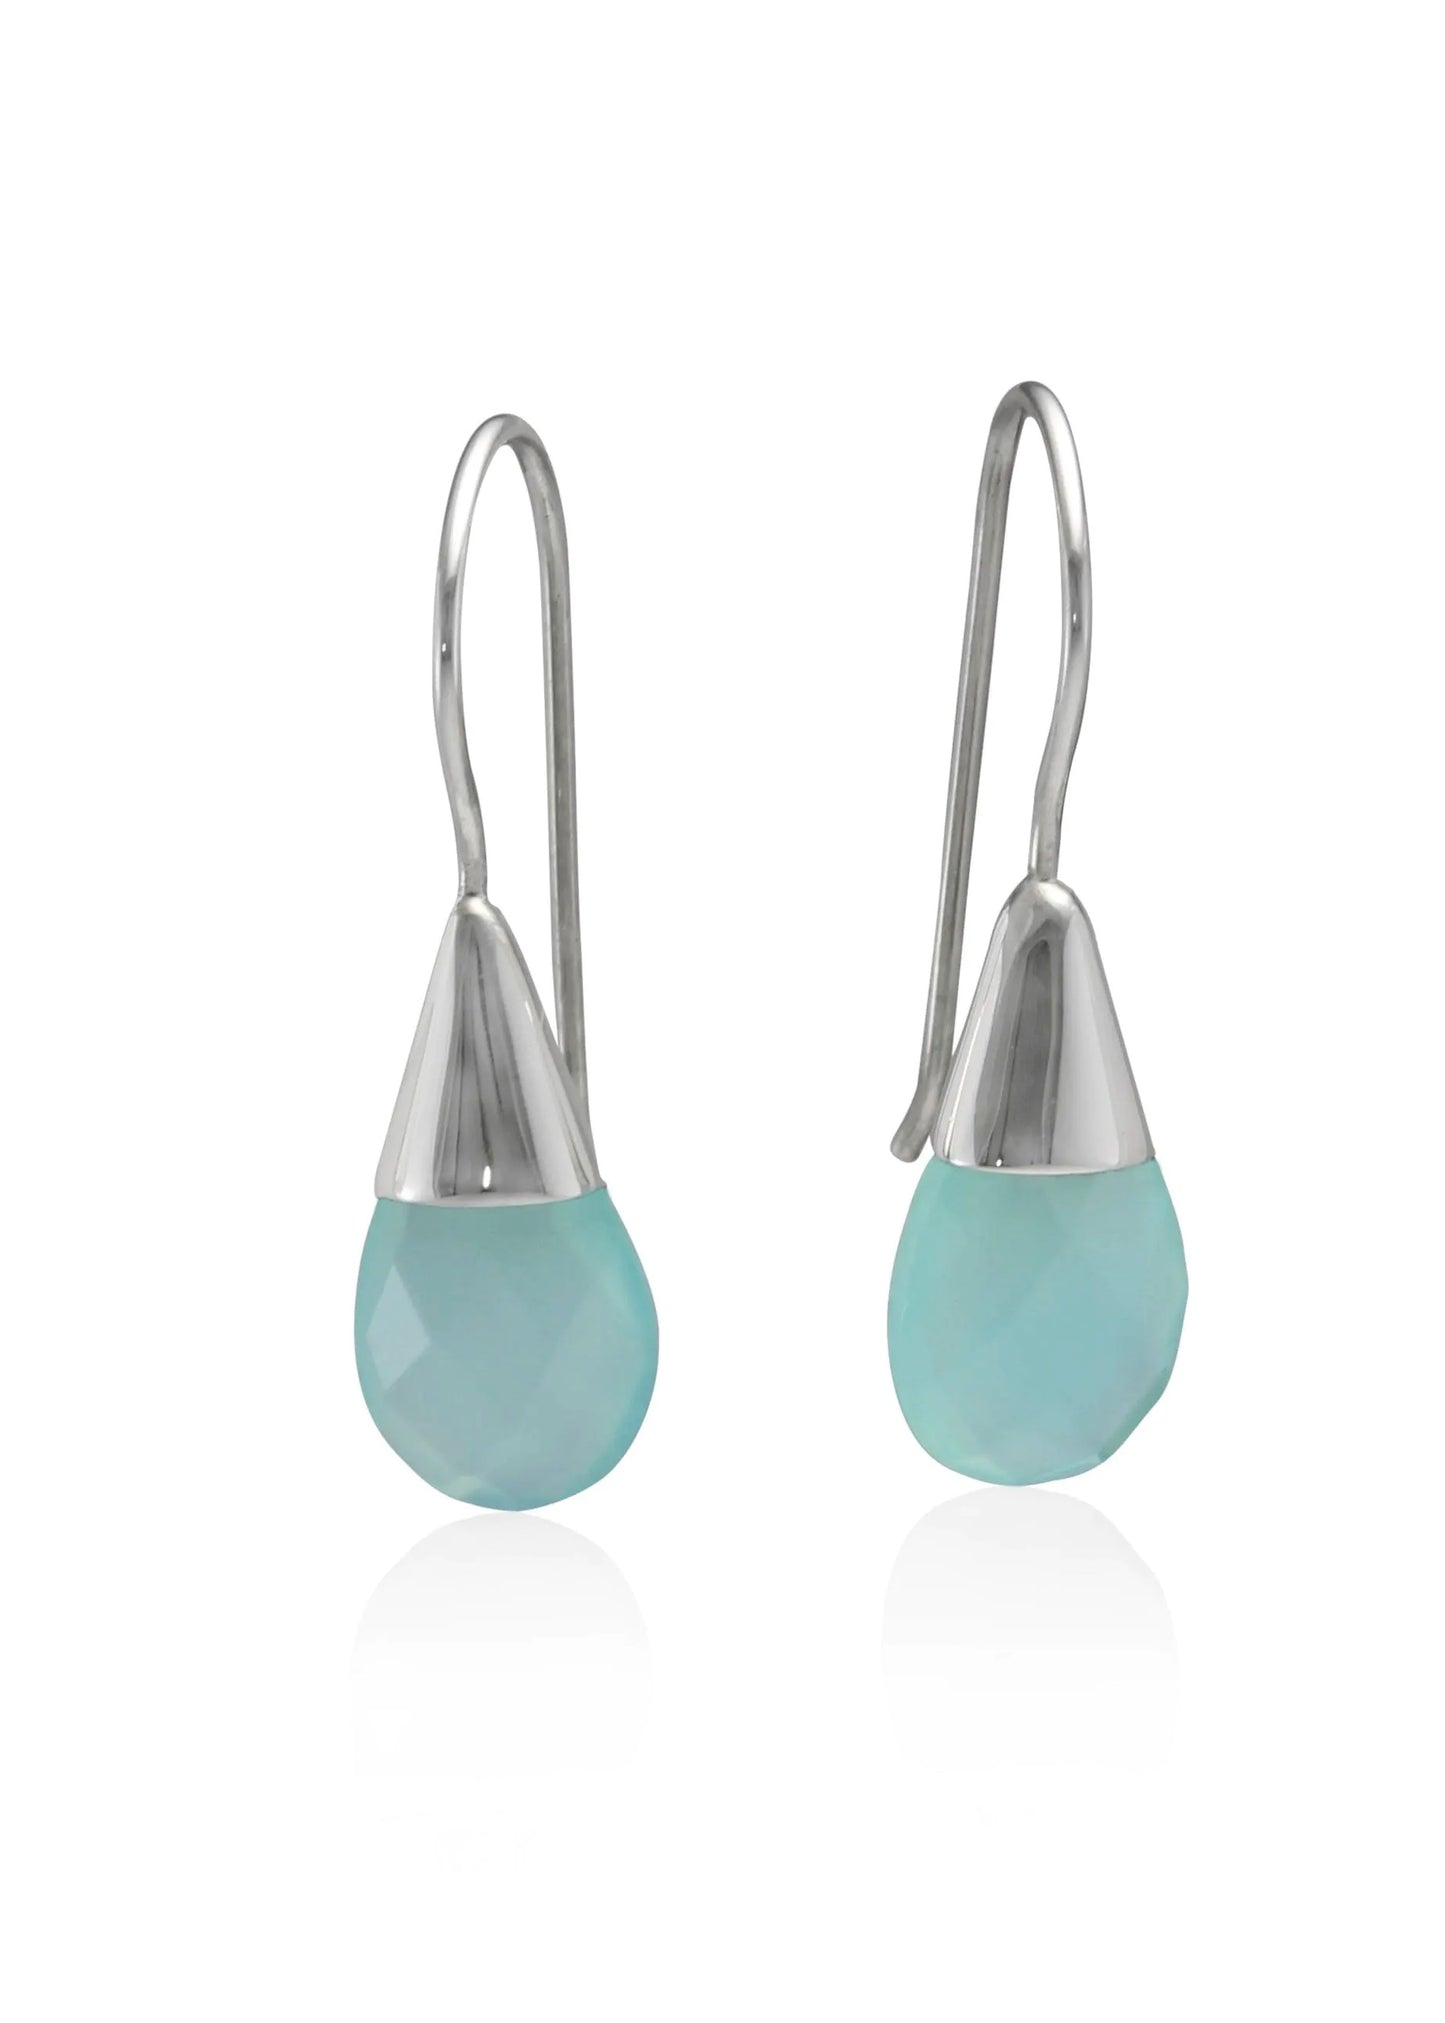 Banyan Silver Delicate Sterling Silver Earrings with Aqua Gemstone*